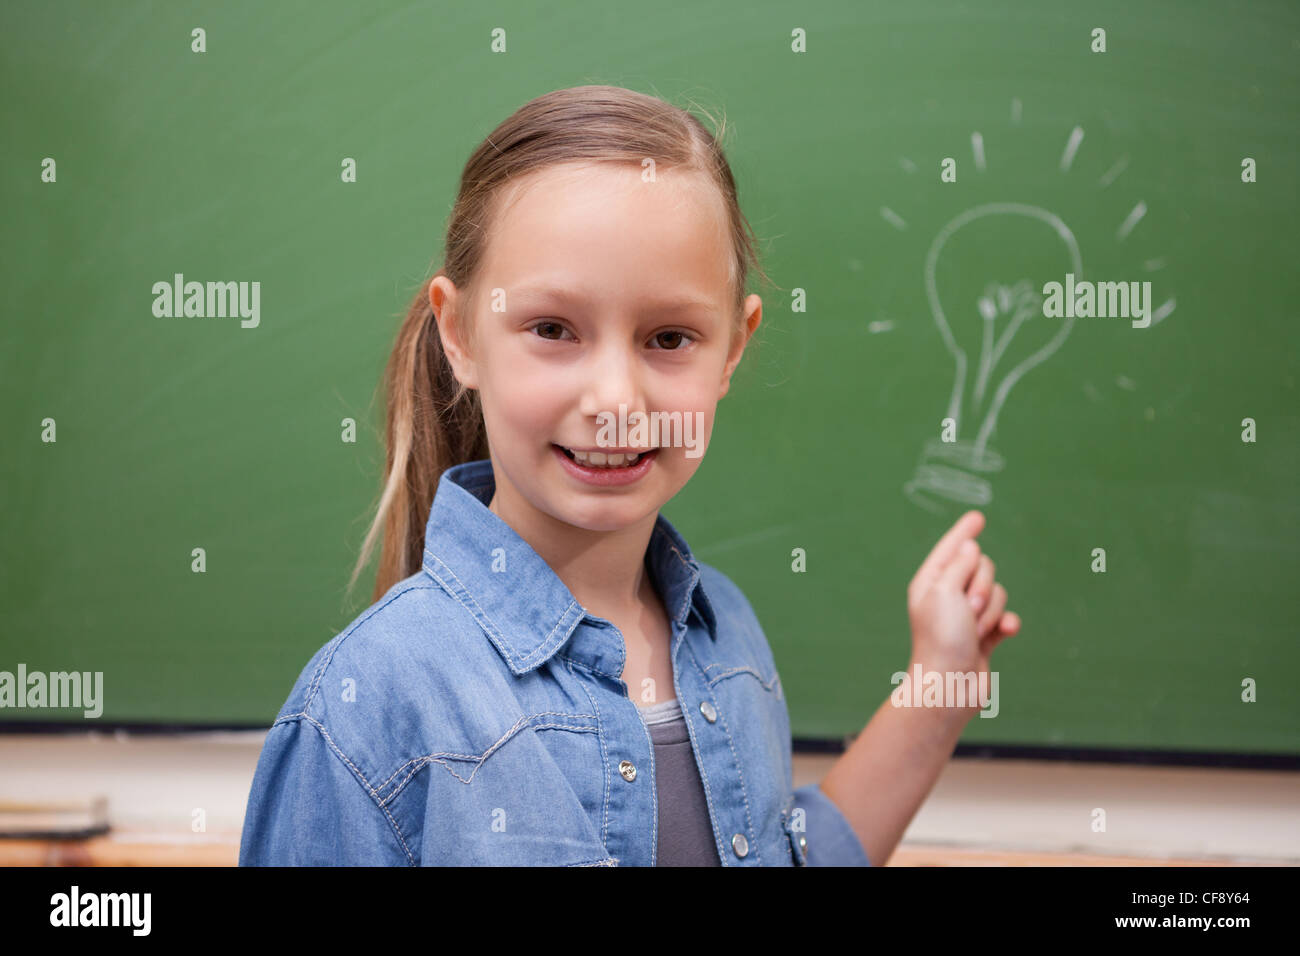 Smiling schoolgirl pointing at a bulb Stock Photo